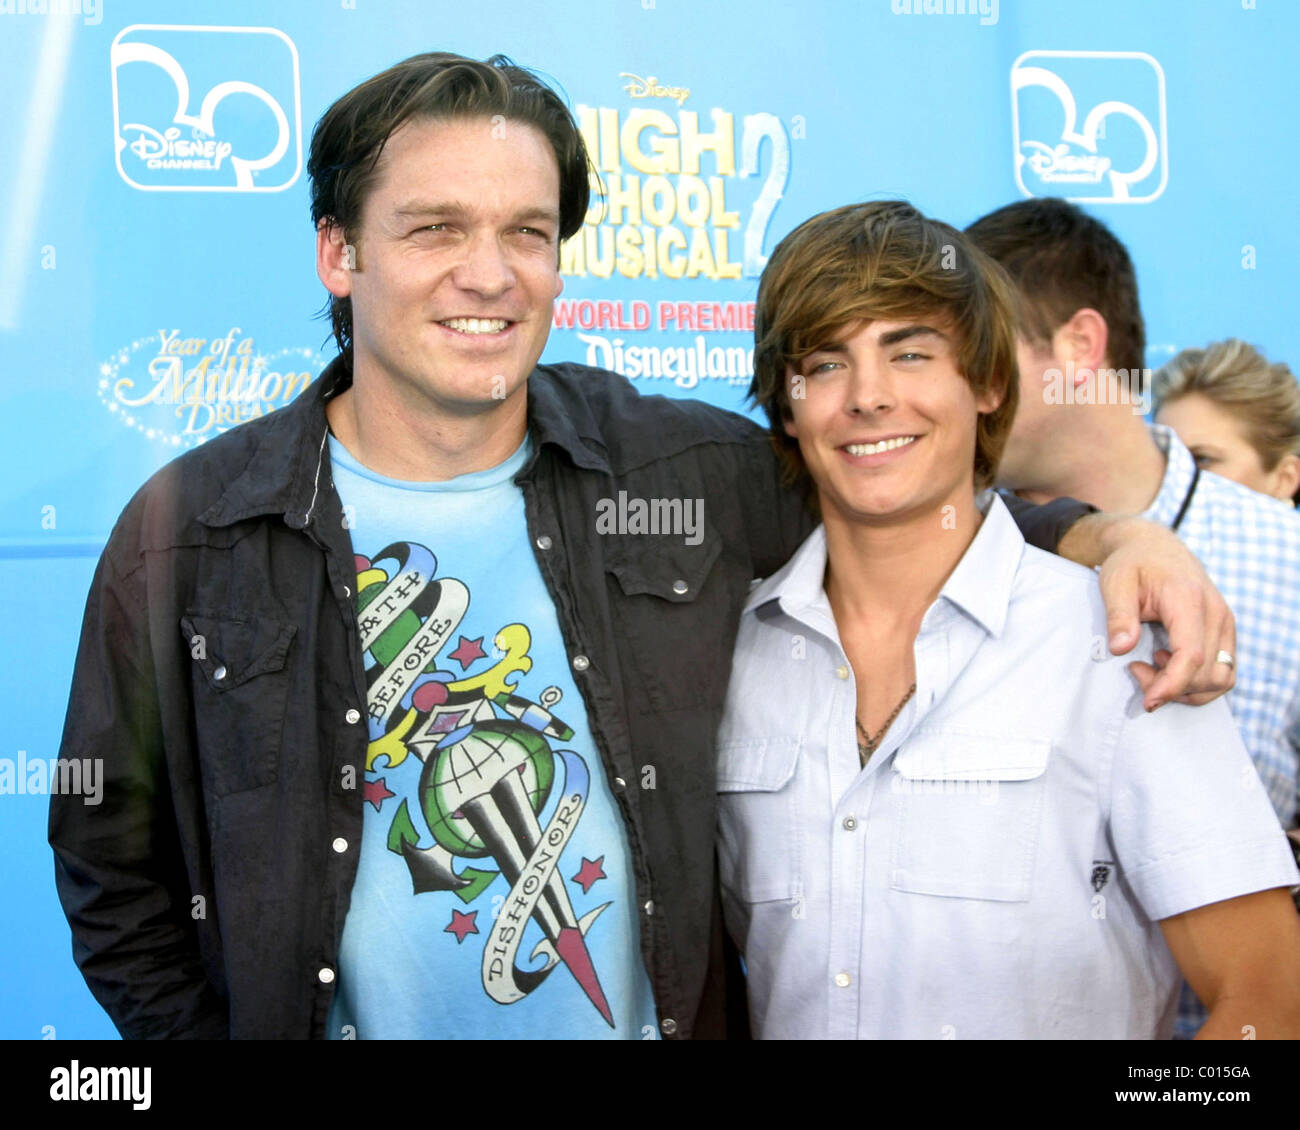 Bart Johnson and Zac Efron &quot;High School Musical 2&quot; Premiere at AMC Theaters  - Downtown Disney Anaheim, California - 14.08.07 Stock Photo - Alamy